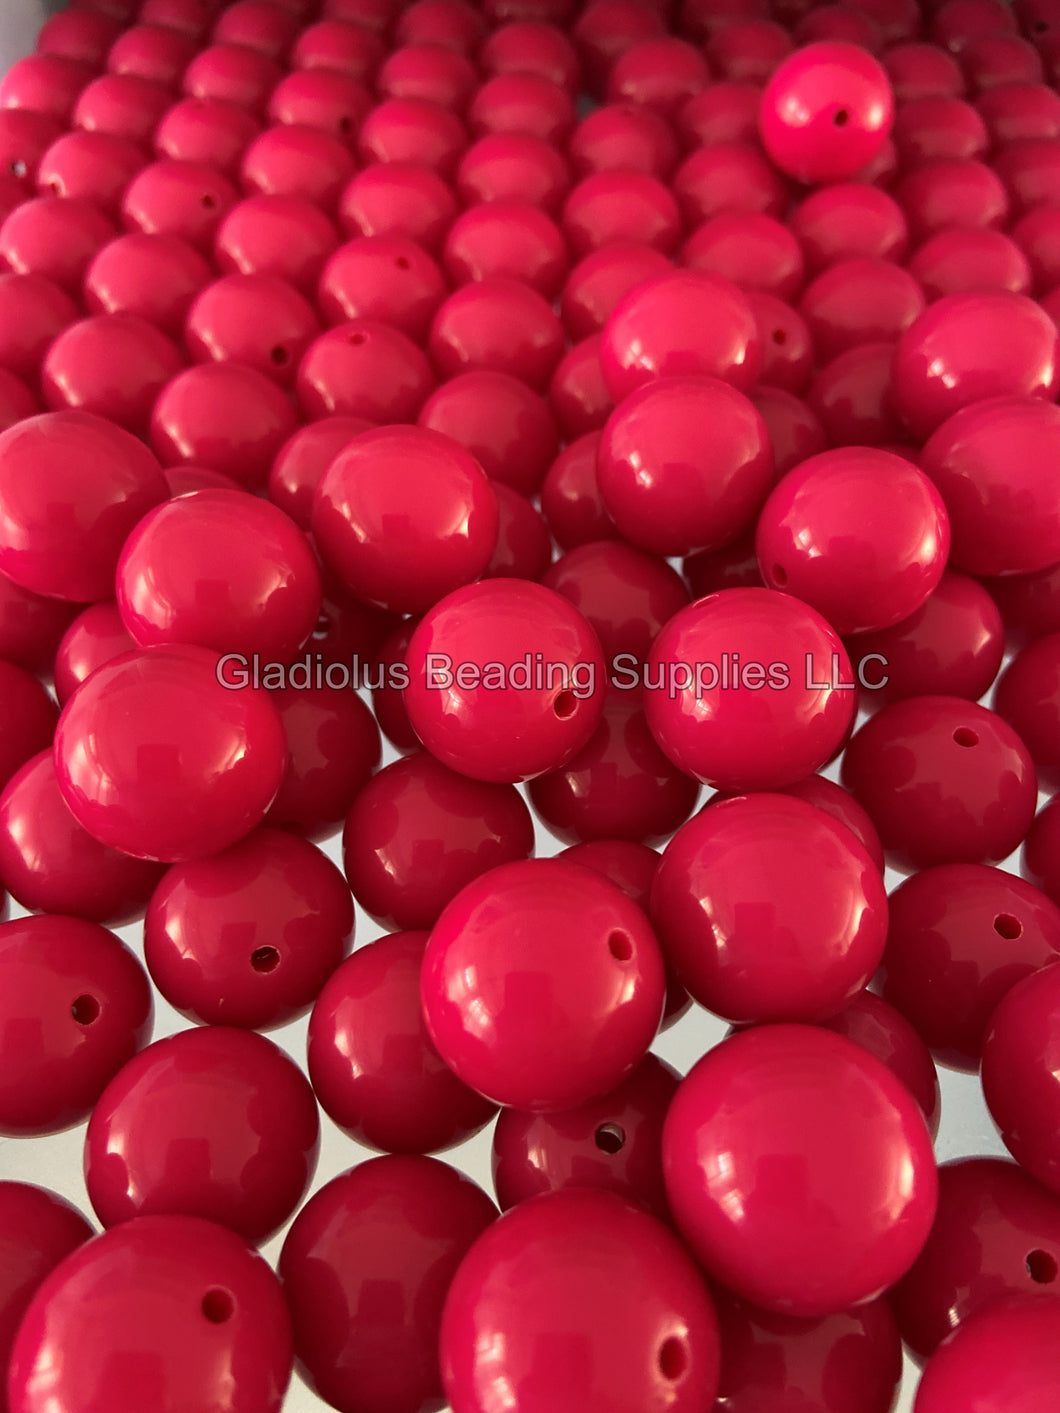 20mm Pink Solid Chunky Acrylic Bubblegum Beads